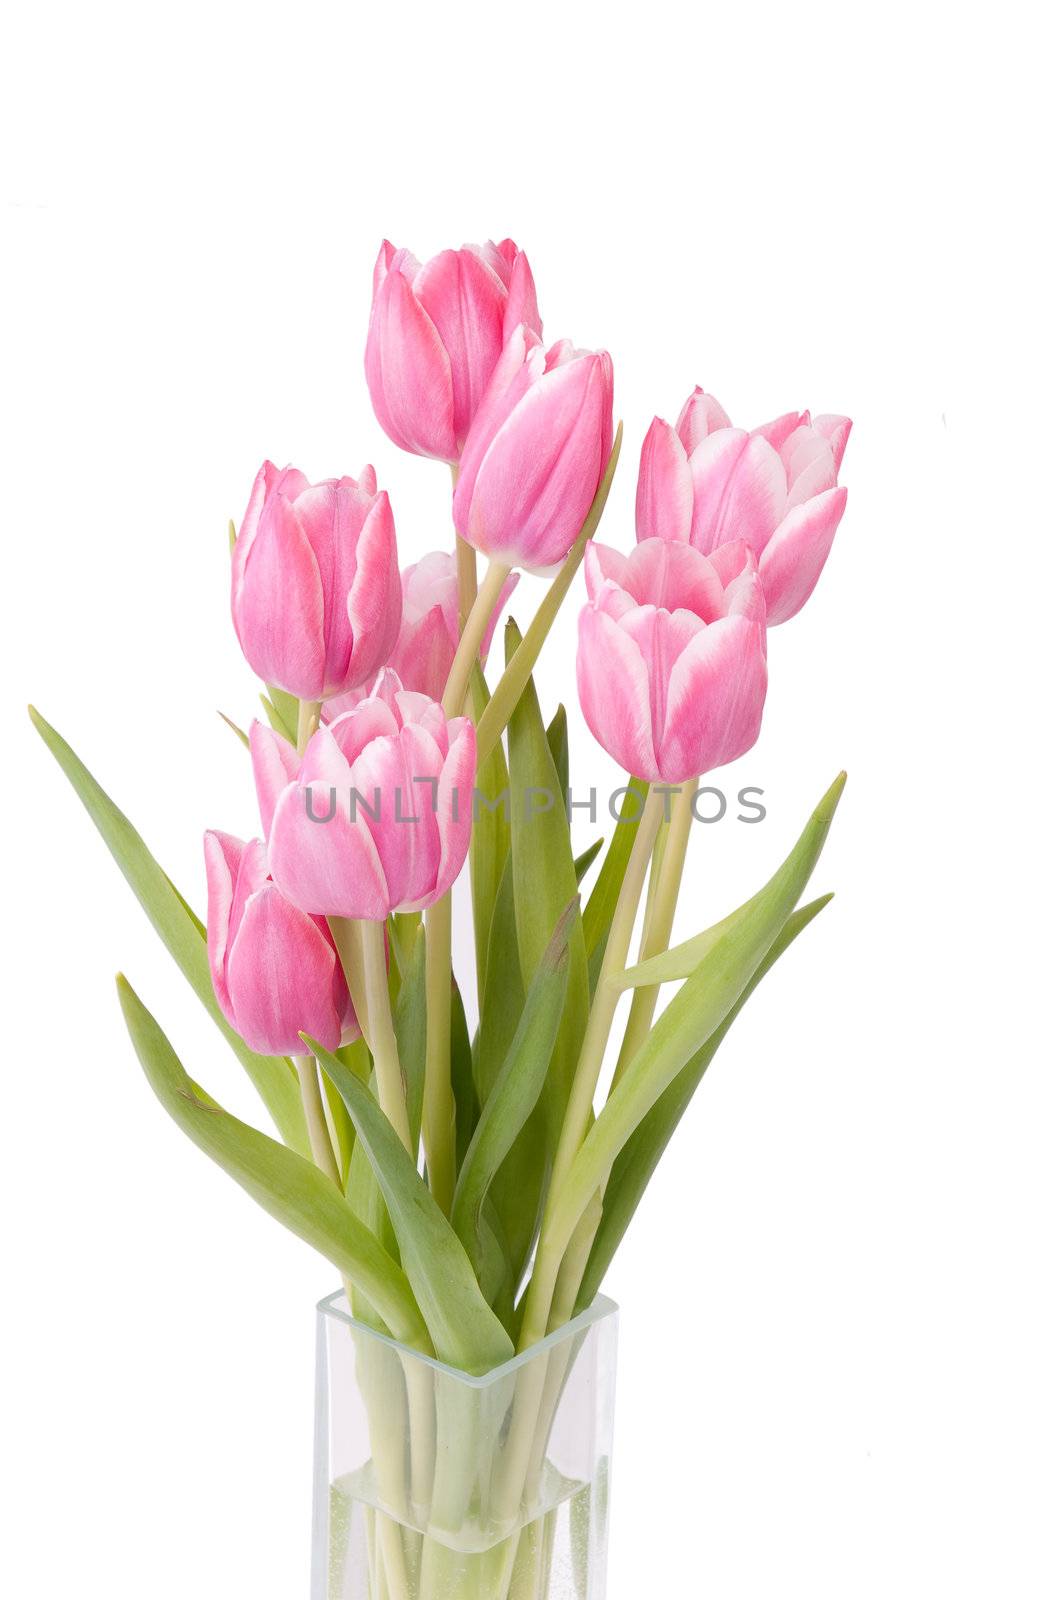 Zoom on a bunch of Tulips in a vase